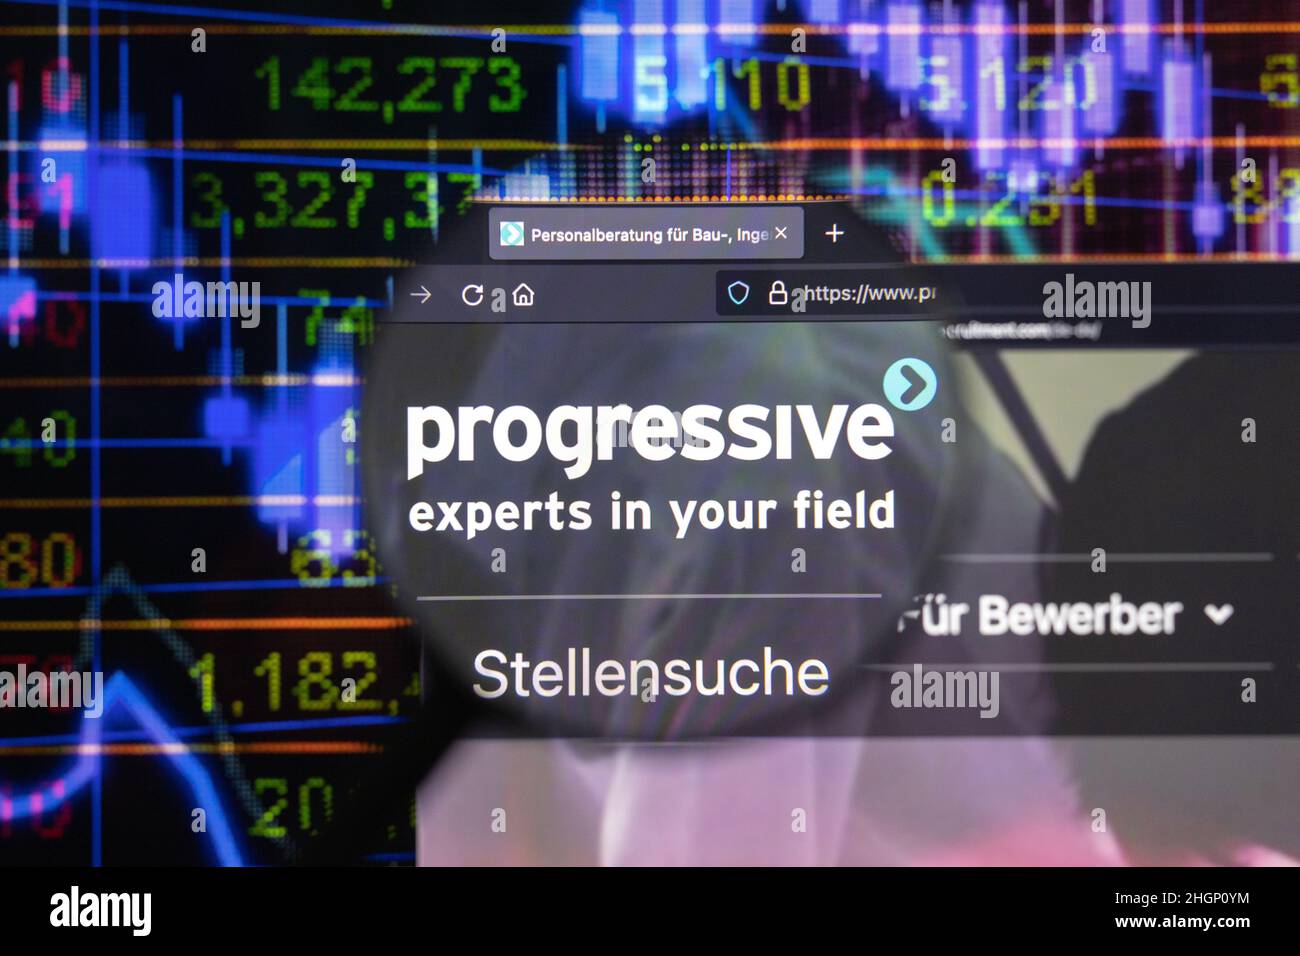 Progressive company logo on a website with blurry stock market developments in the background, seen on a computer screen through a magnifying glass. Stock Photo